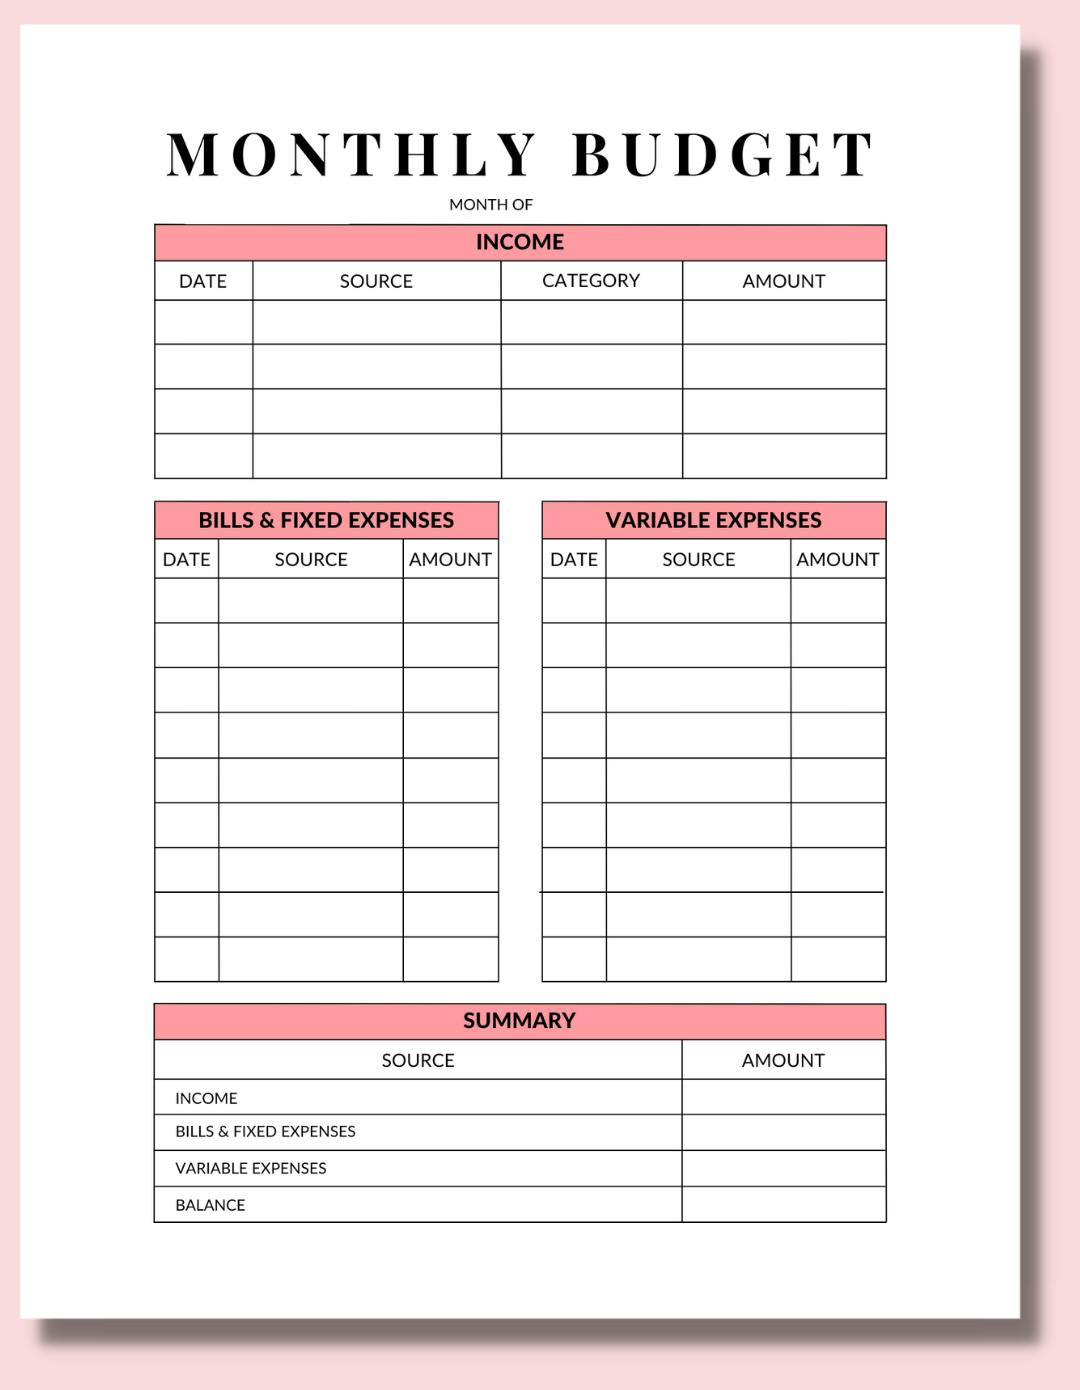 How To Make A Biweekly Budget